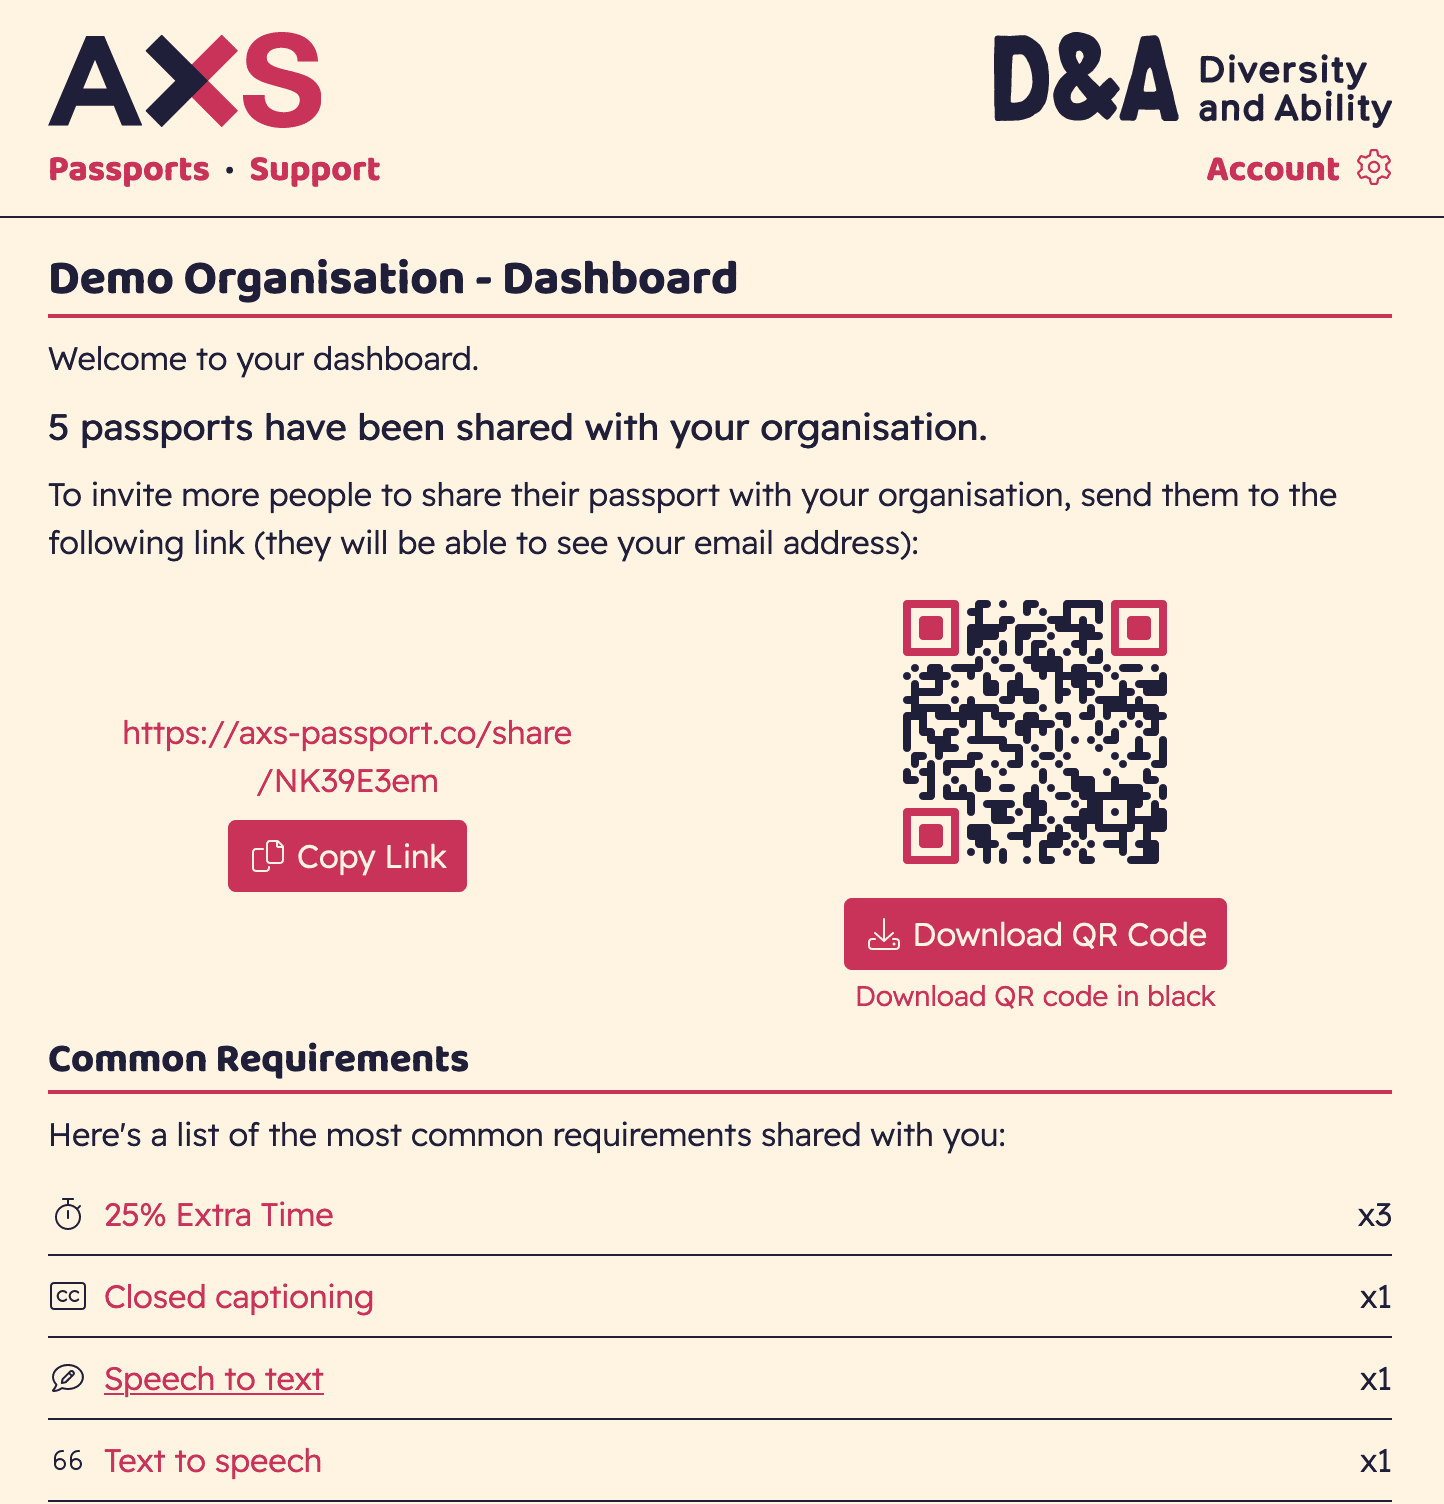 A screenshot of the AXS Passport website, showing the dashboard for a demo organisation's view of the site. On the page is a share link and QR code to share passports with the organisation, information about how many people have shared their passport with the organisation, and which requirements those people have.